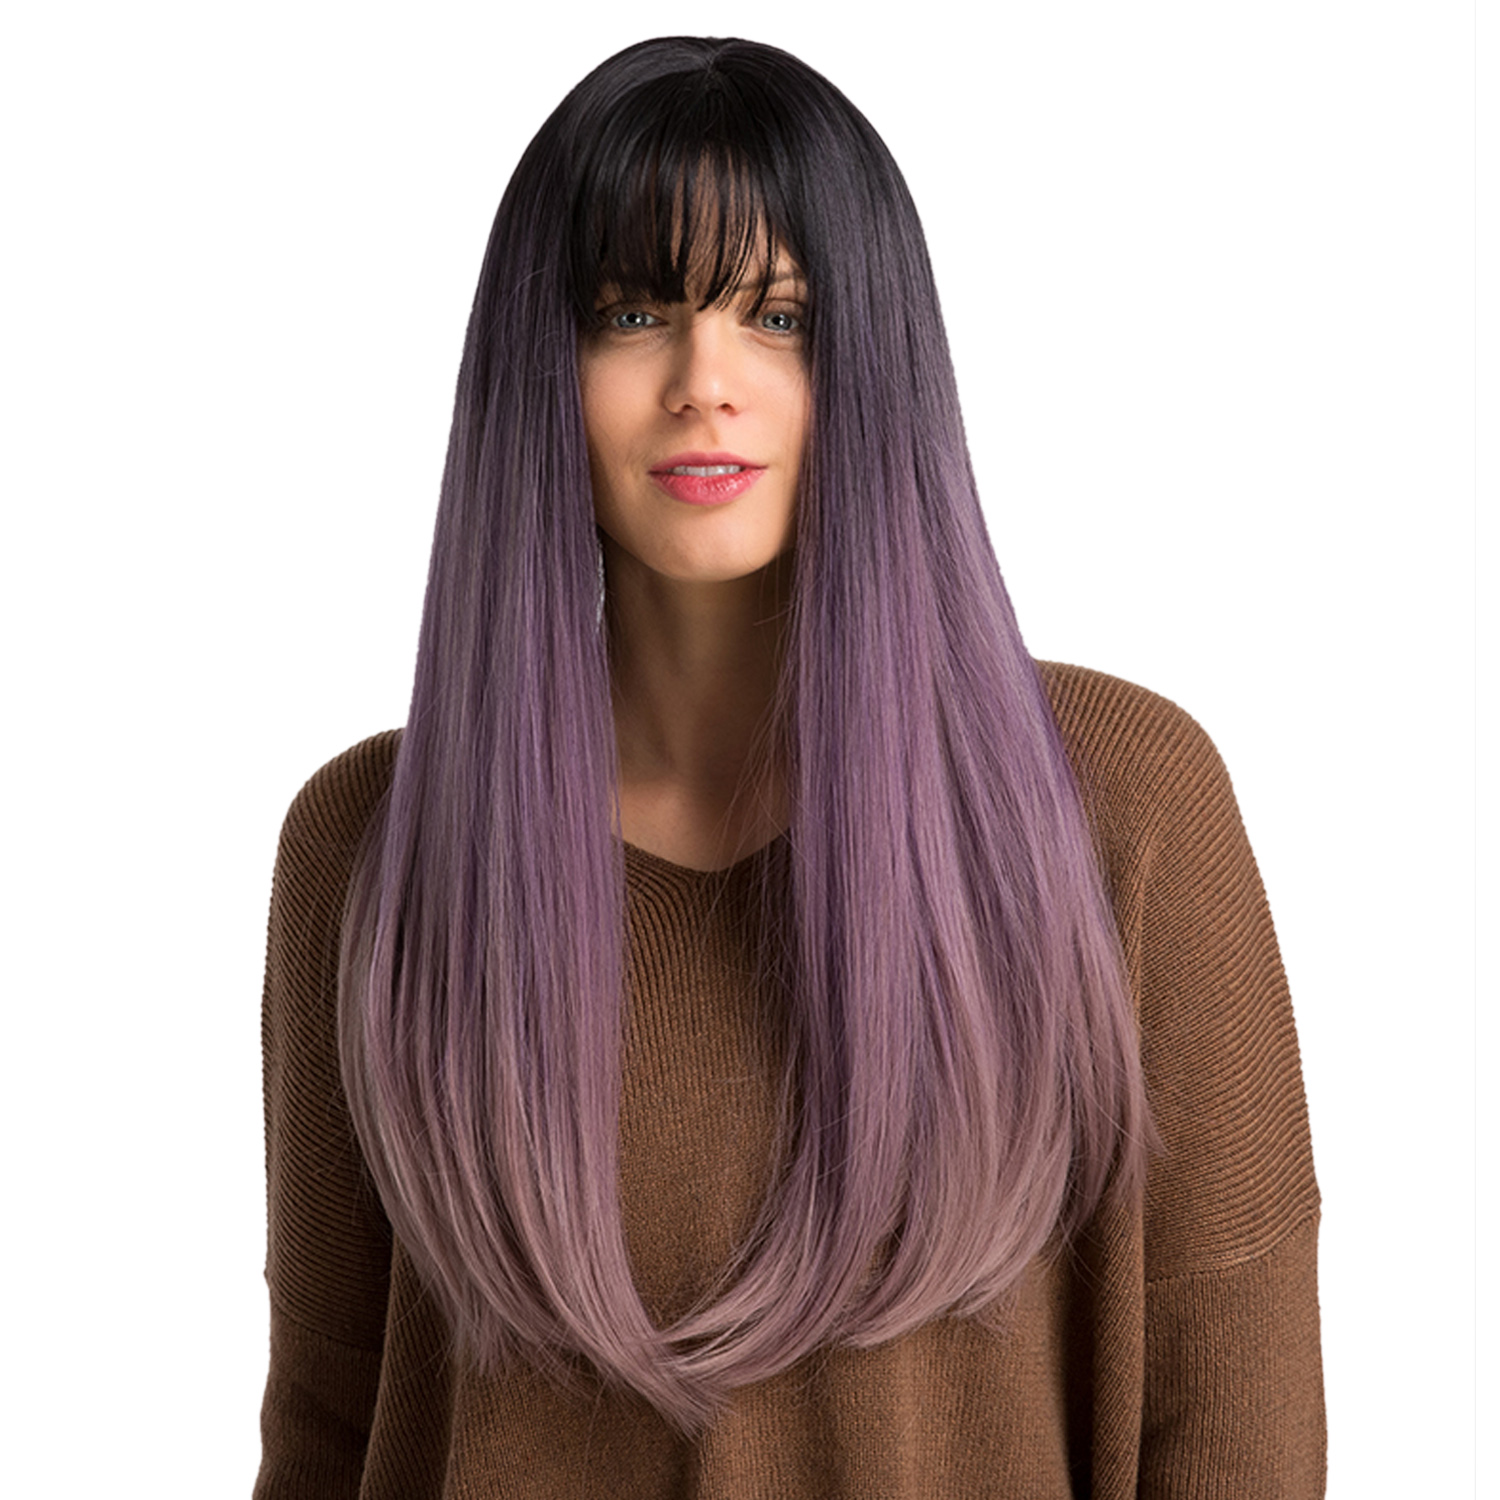 130% Density Long Straight Hair Wigs Black&Purple Color Synthetic Capless Wig 24inch